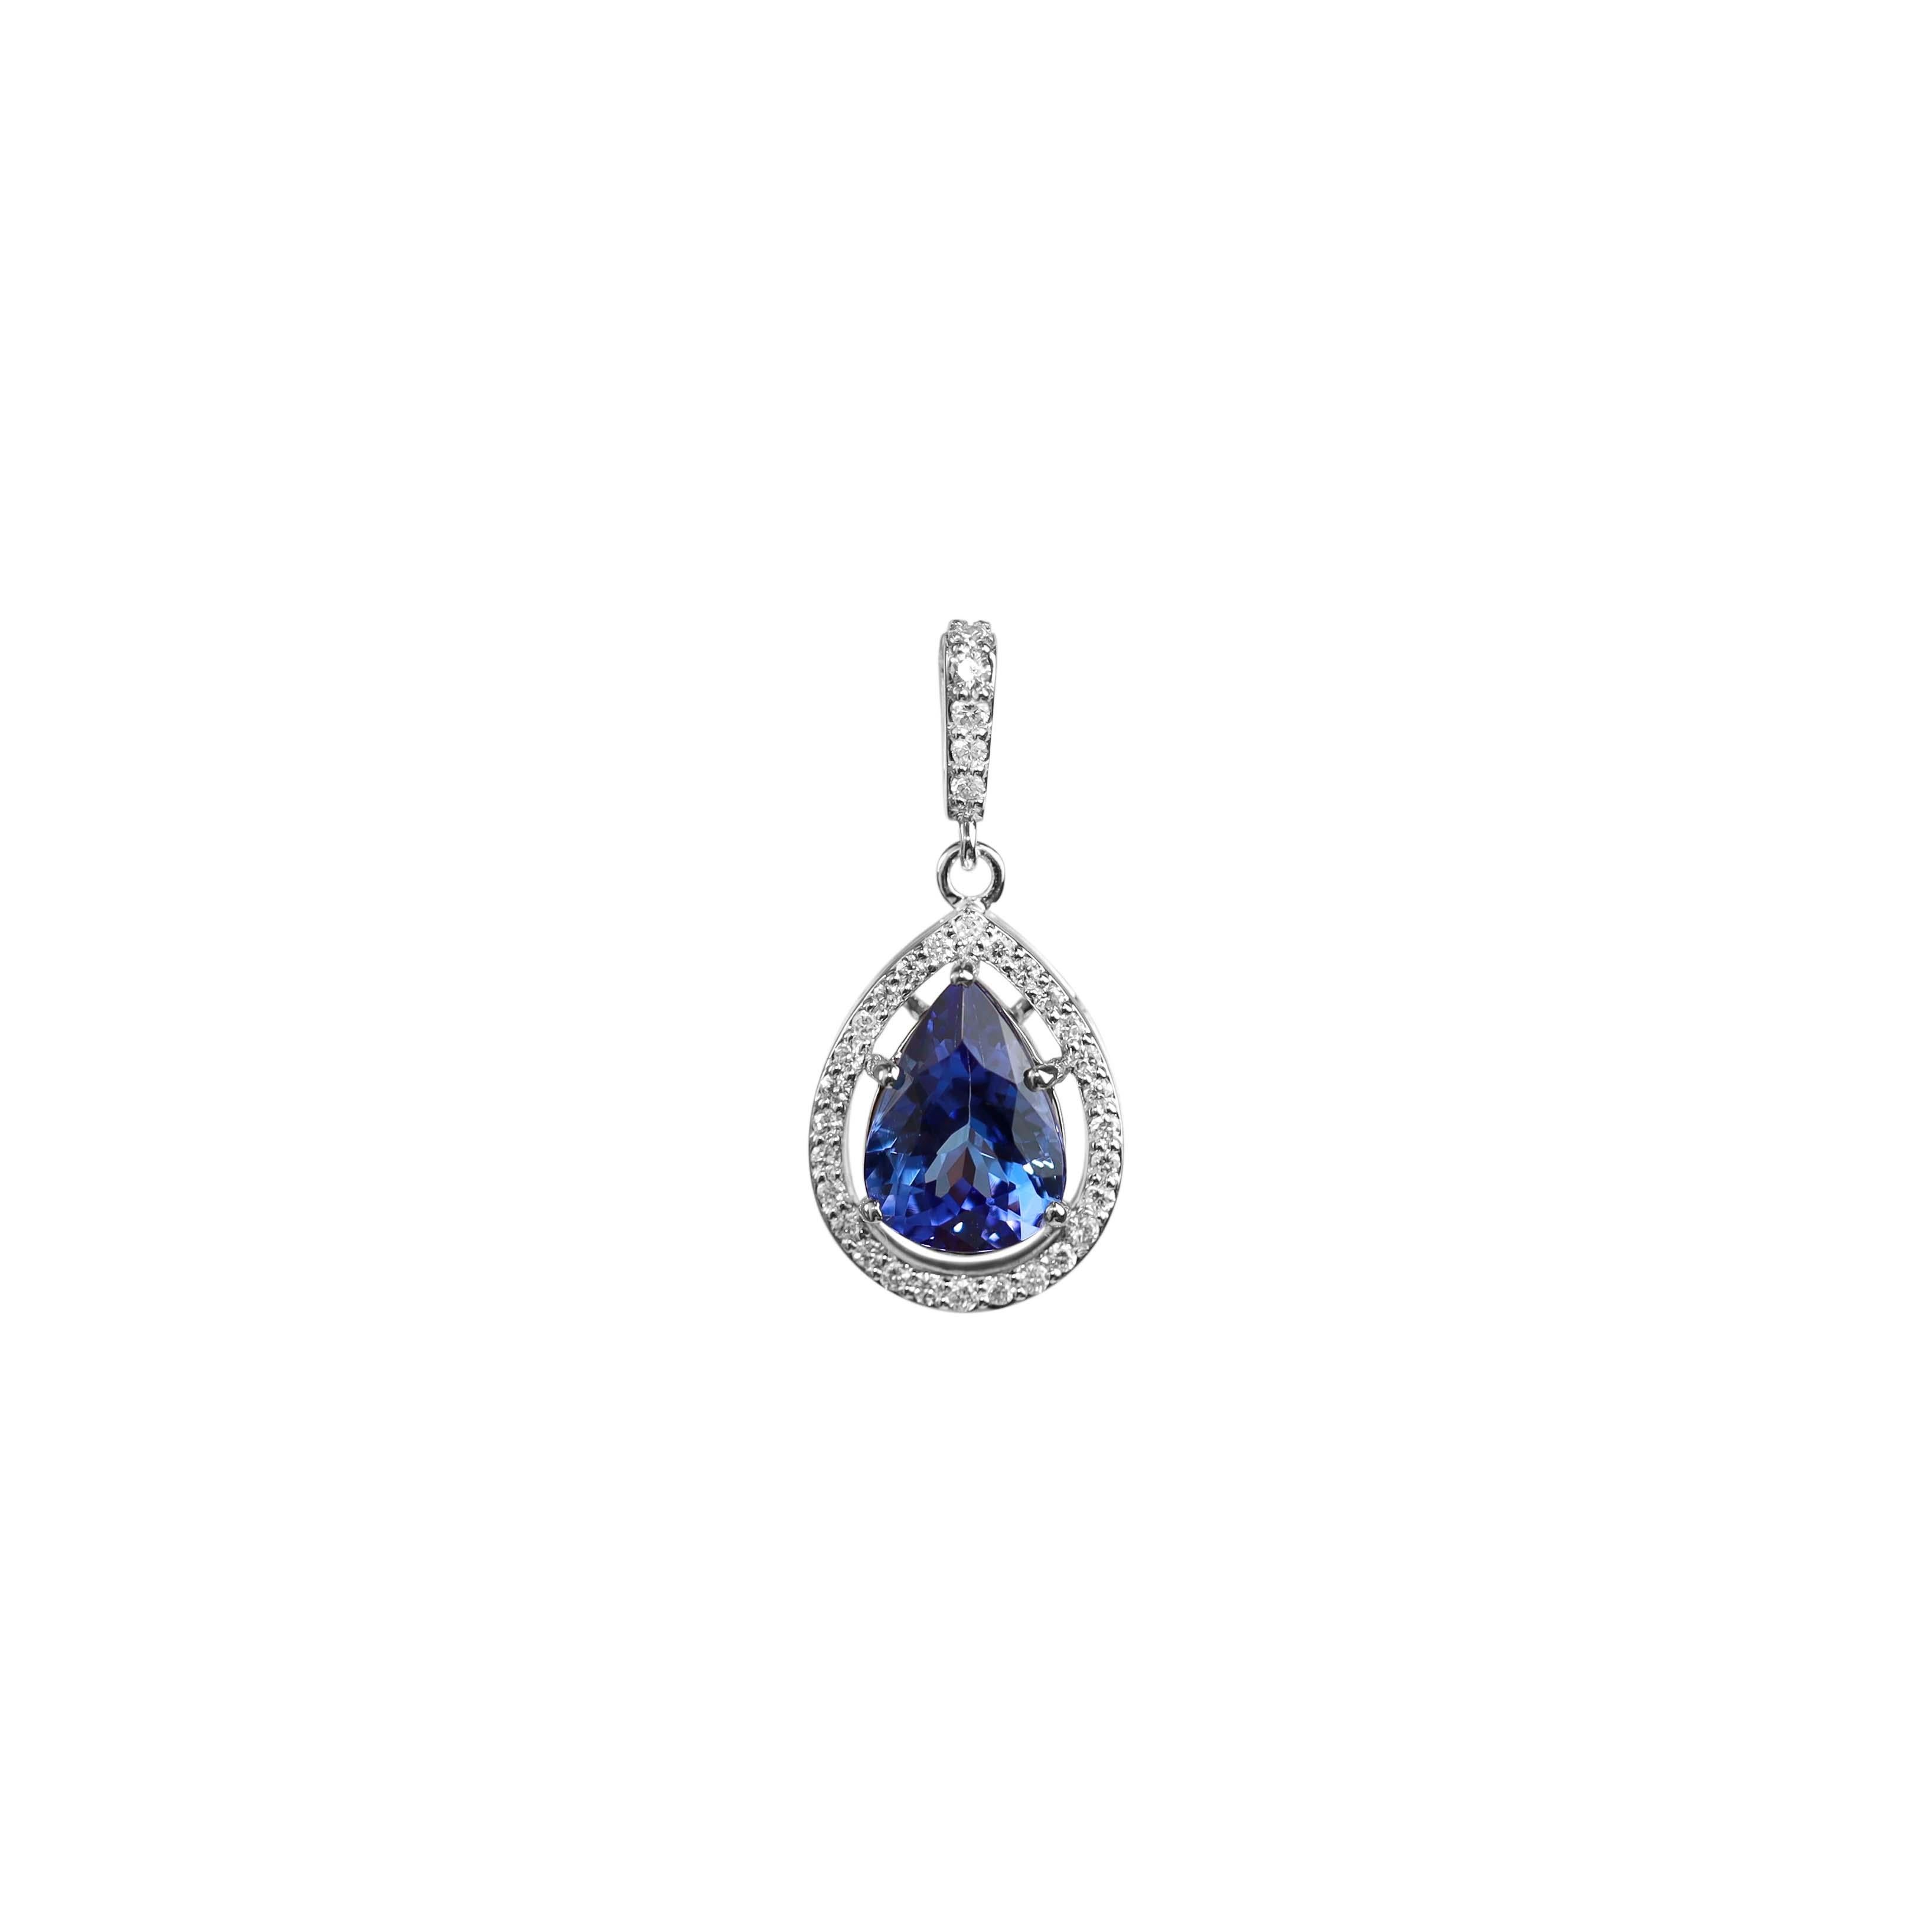 3 Carat Pear Cut Tanzanite and diamond pendant

Available in 18k Yellow gold.

Same design can be made also with other custom gemstones per request.

Product details:

- Solid gold 18k white gold 

- Main stone - approx. 3 carat pear tanzanite


-